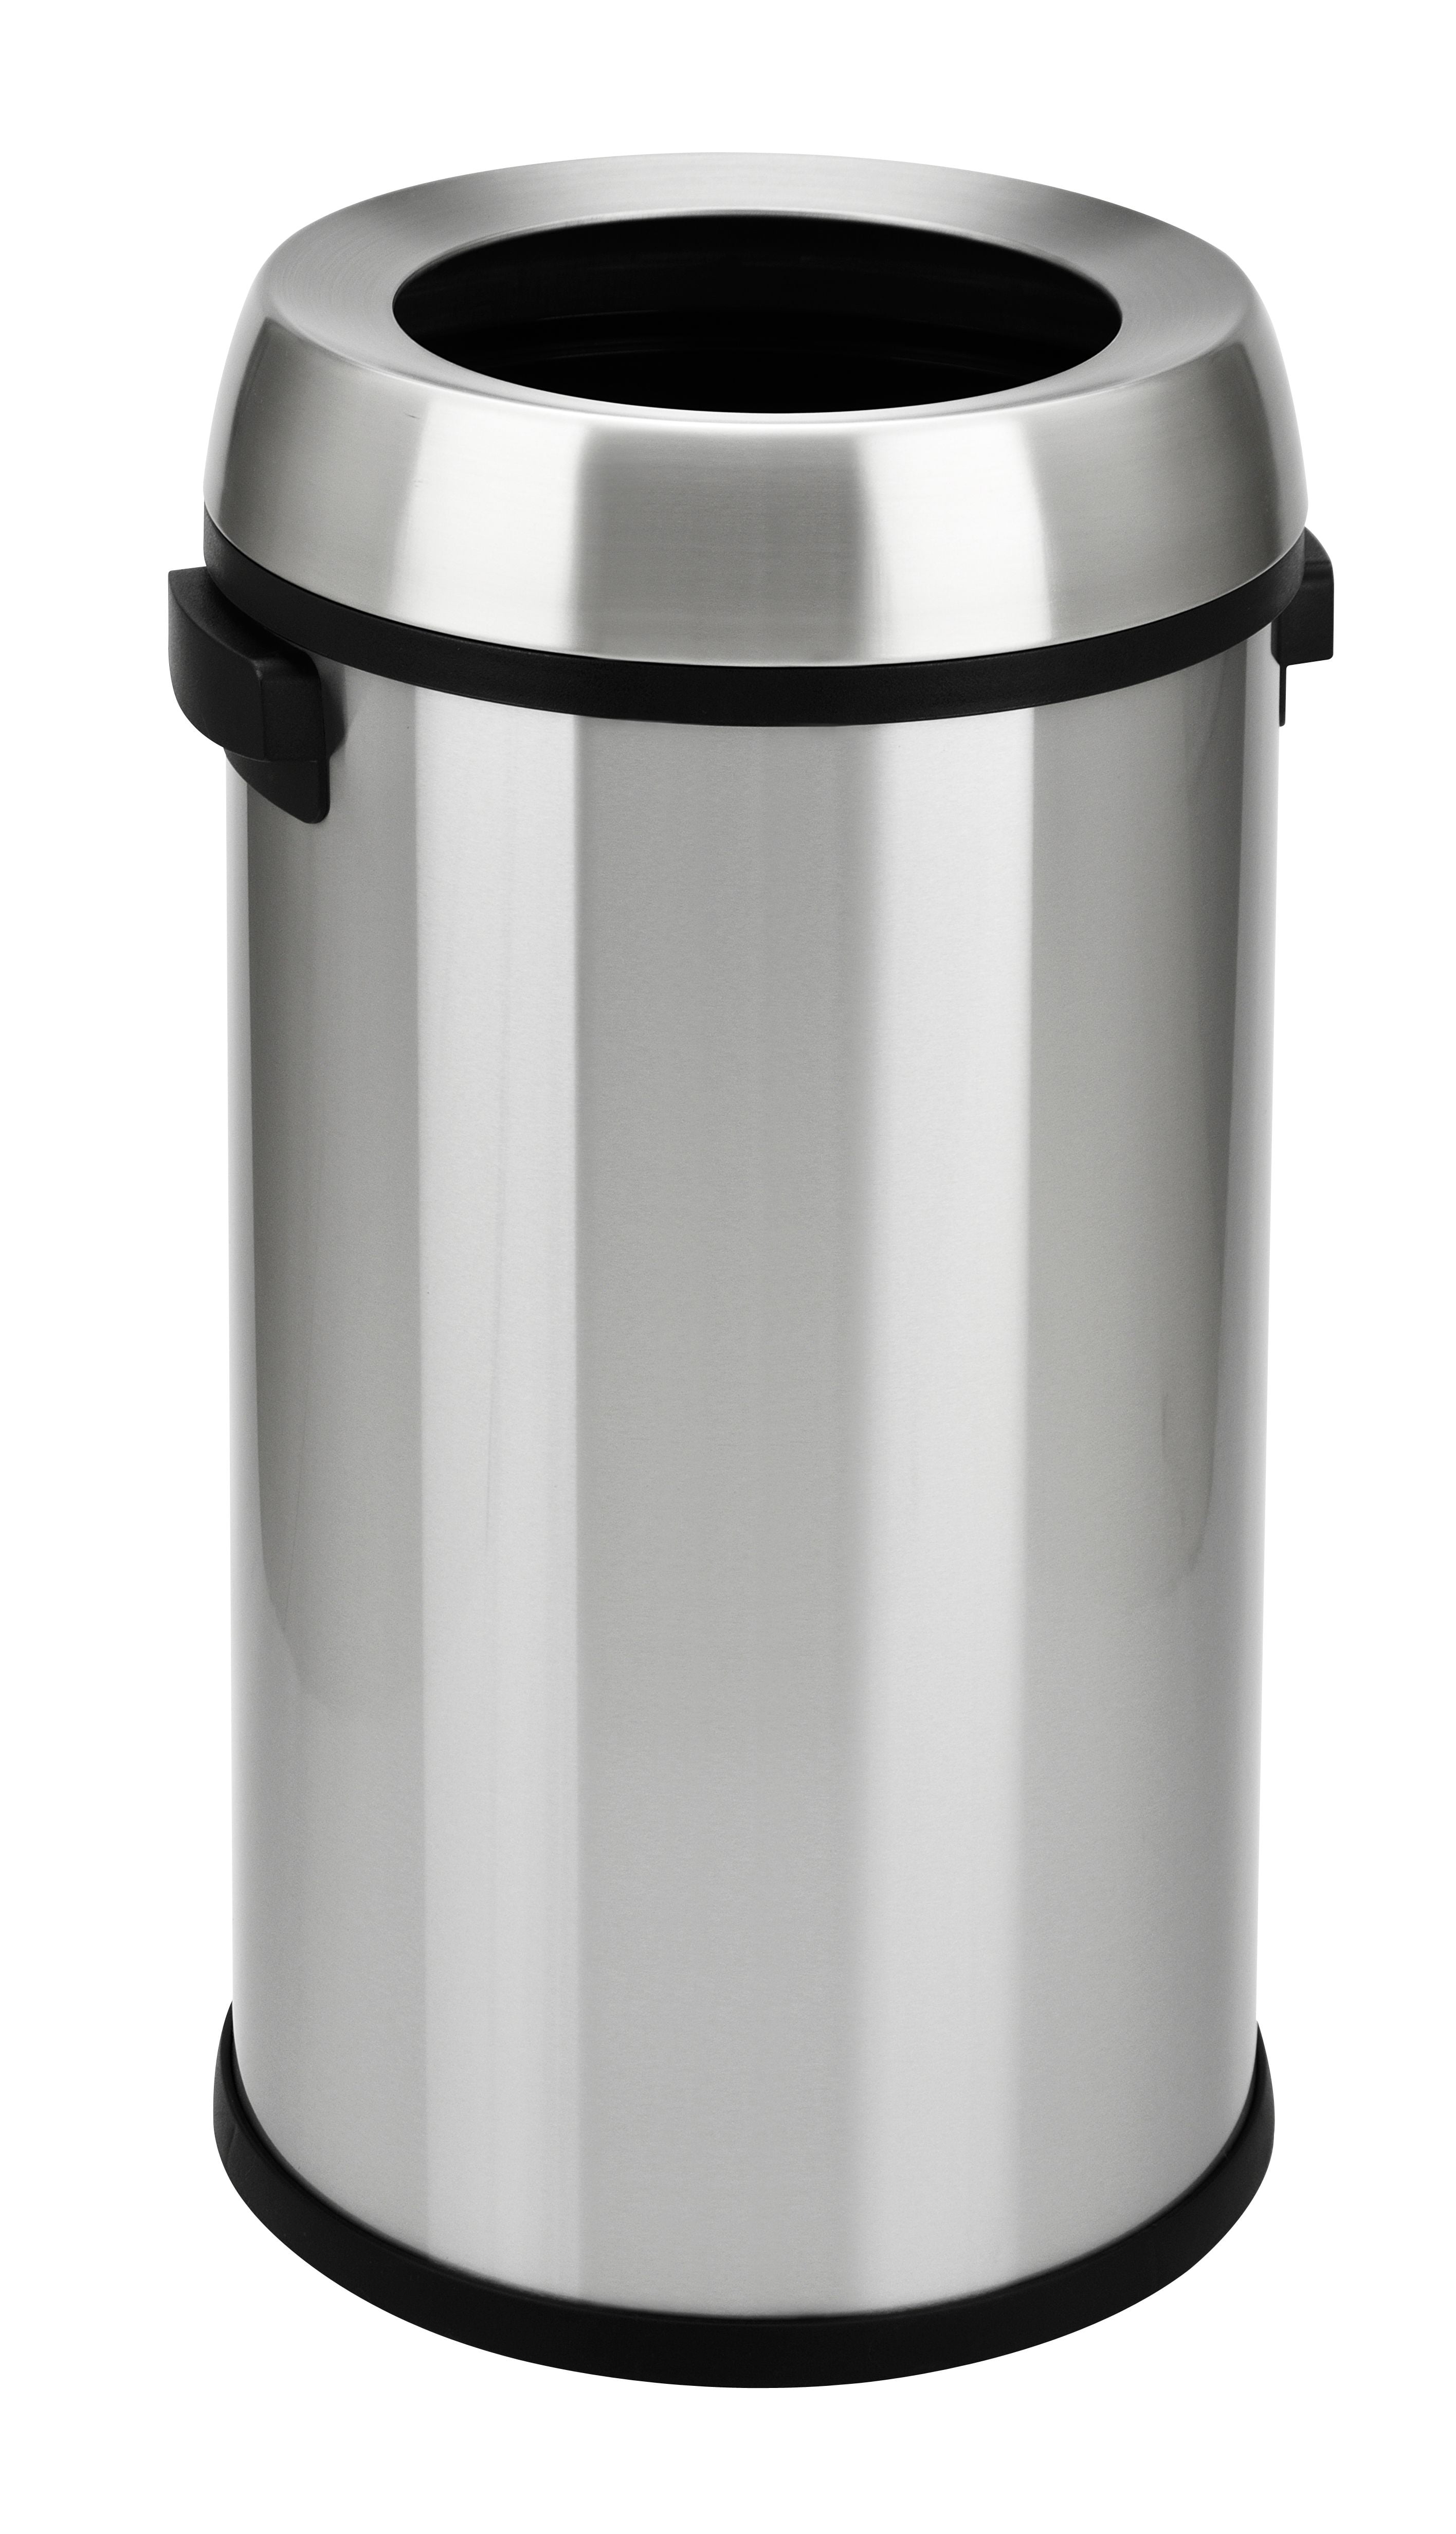 Step N' Sort Stainless Steel Commercial Open Top Trash Can, 17 Gallon Commercial Stainless Steel Garbage Cans